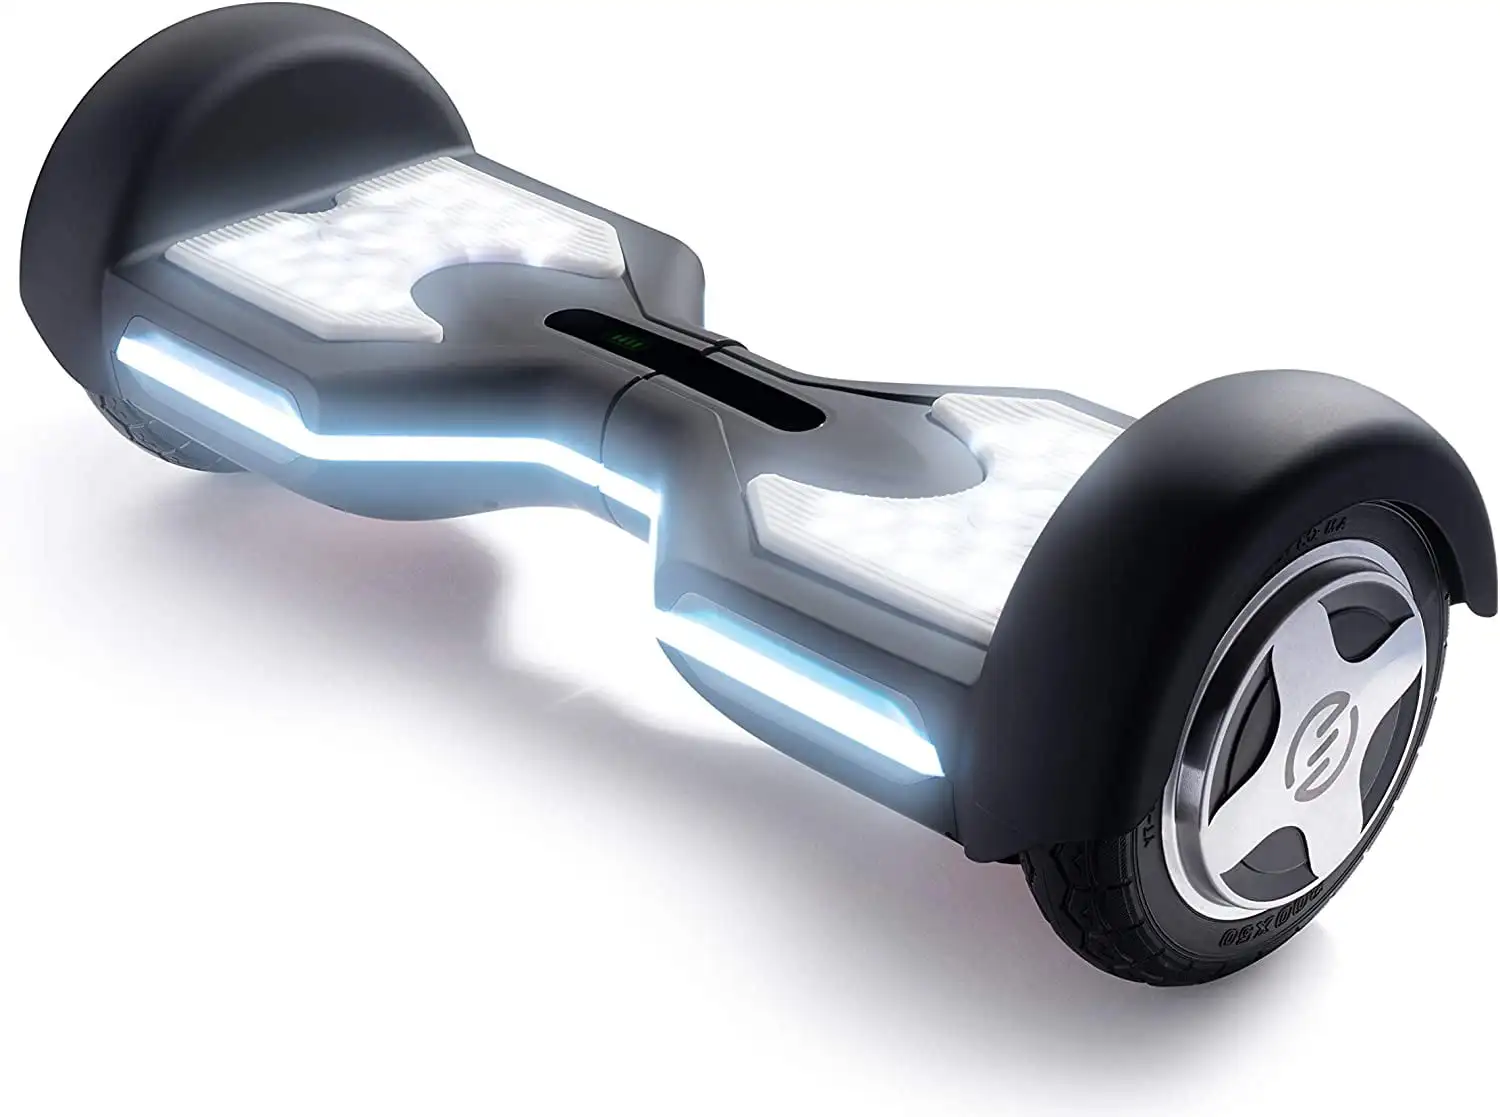 Hoverboard Self Balancing Scooter, Bluetooth Speaker Glowing Foot Pads for Kids Adults Matte Carbon Black